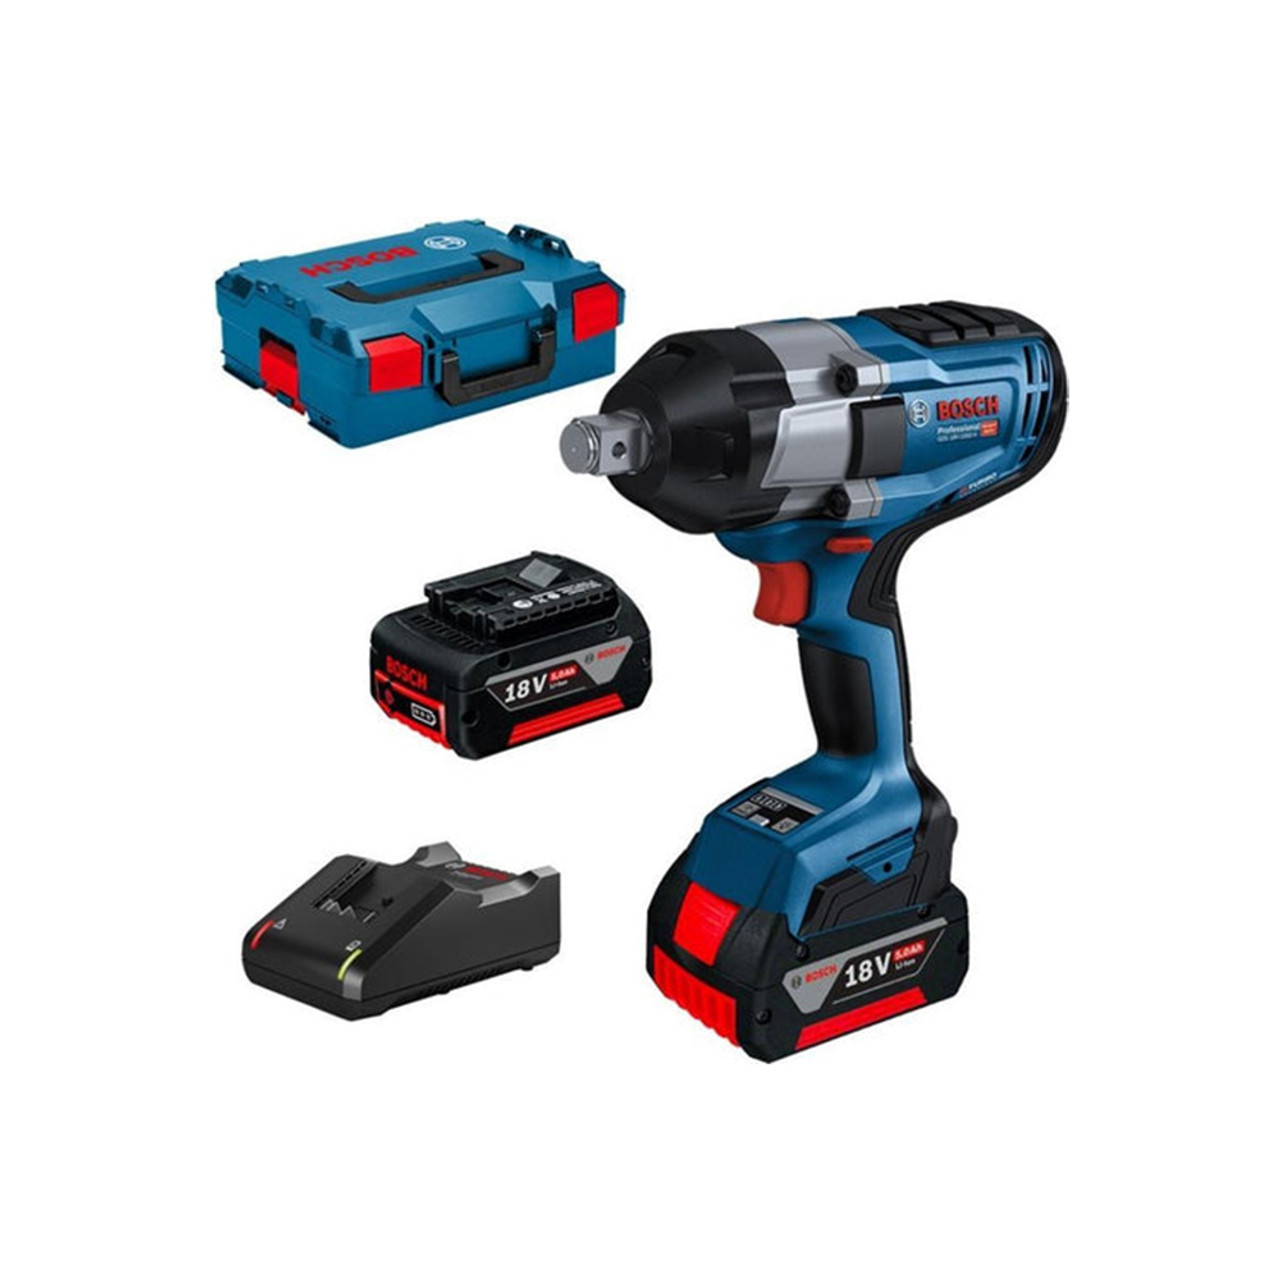 Buy online Bosch GDS 18V-1050 H Professional, Impact Wrench